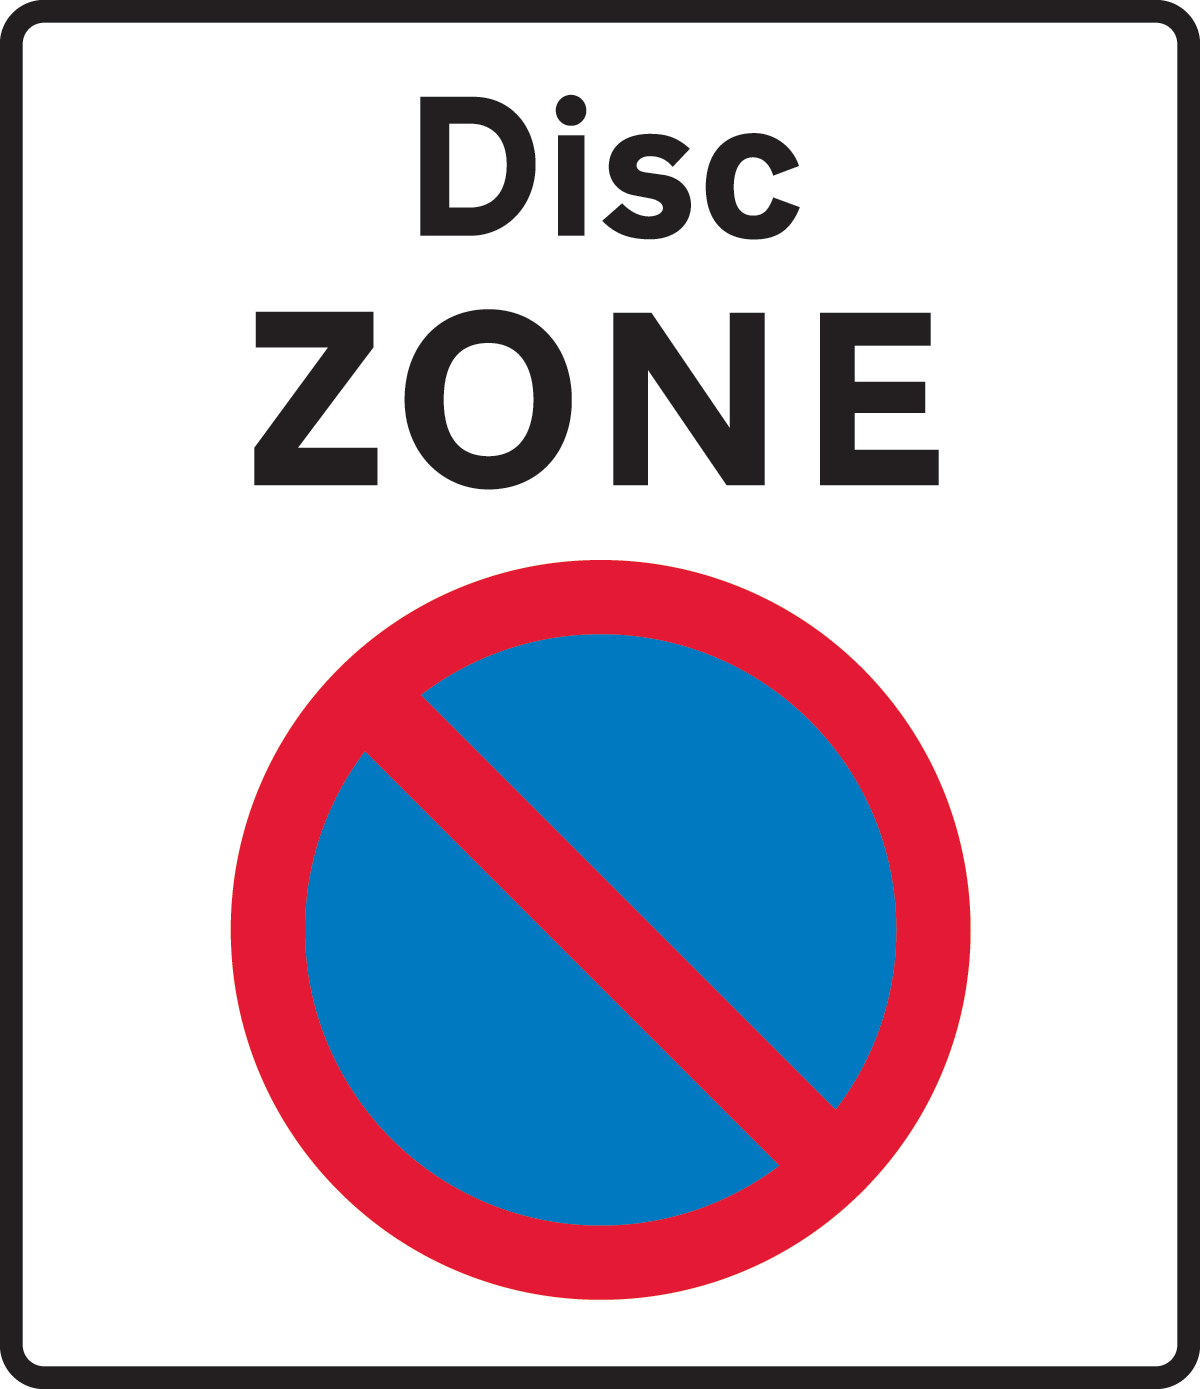 The parking disc and the blue zone - Car theory practice & video course